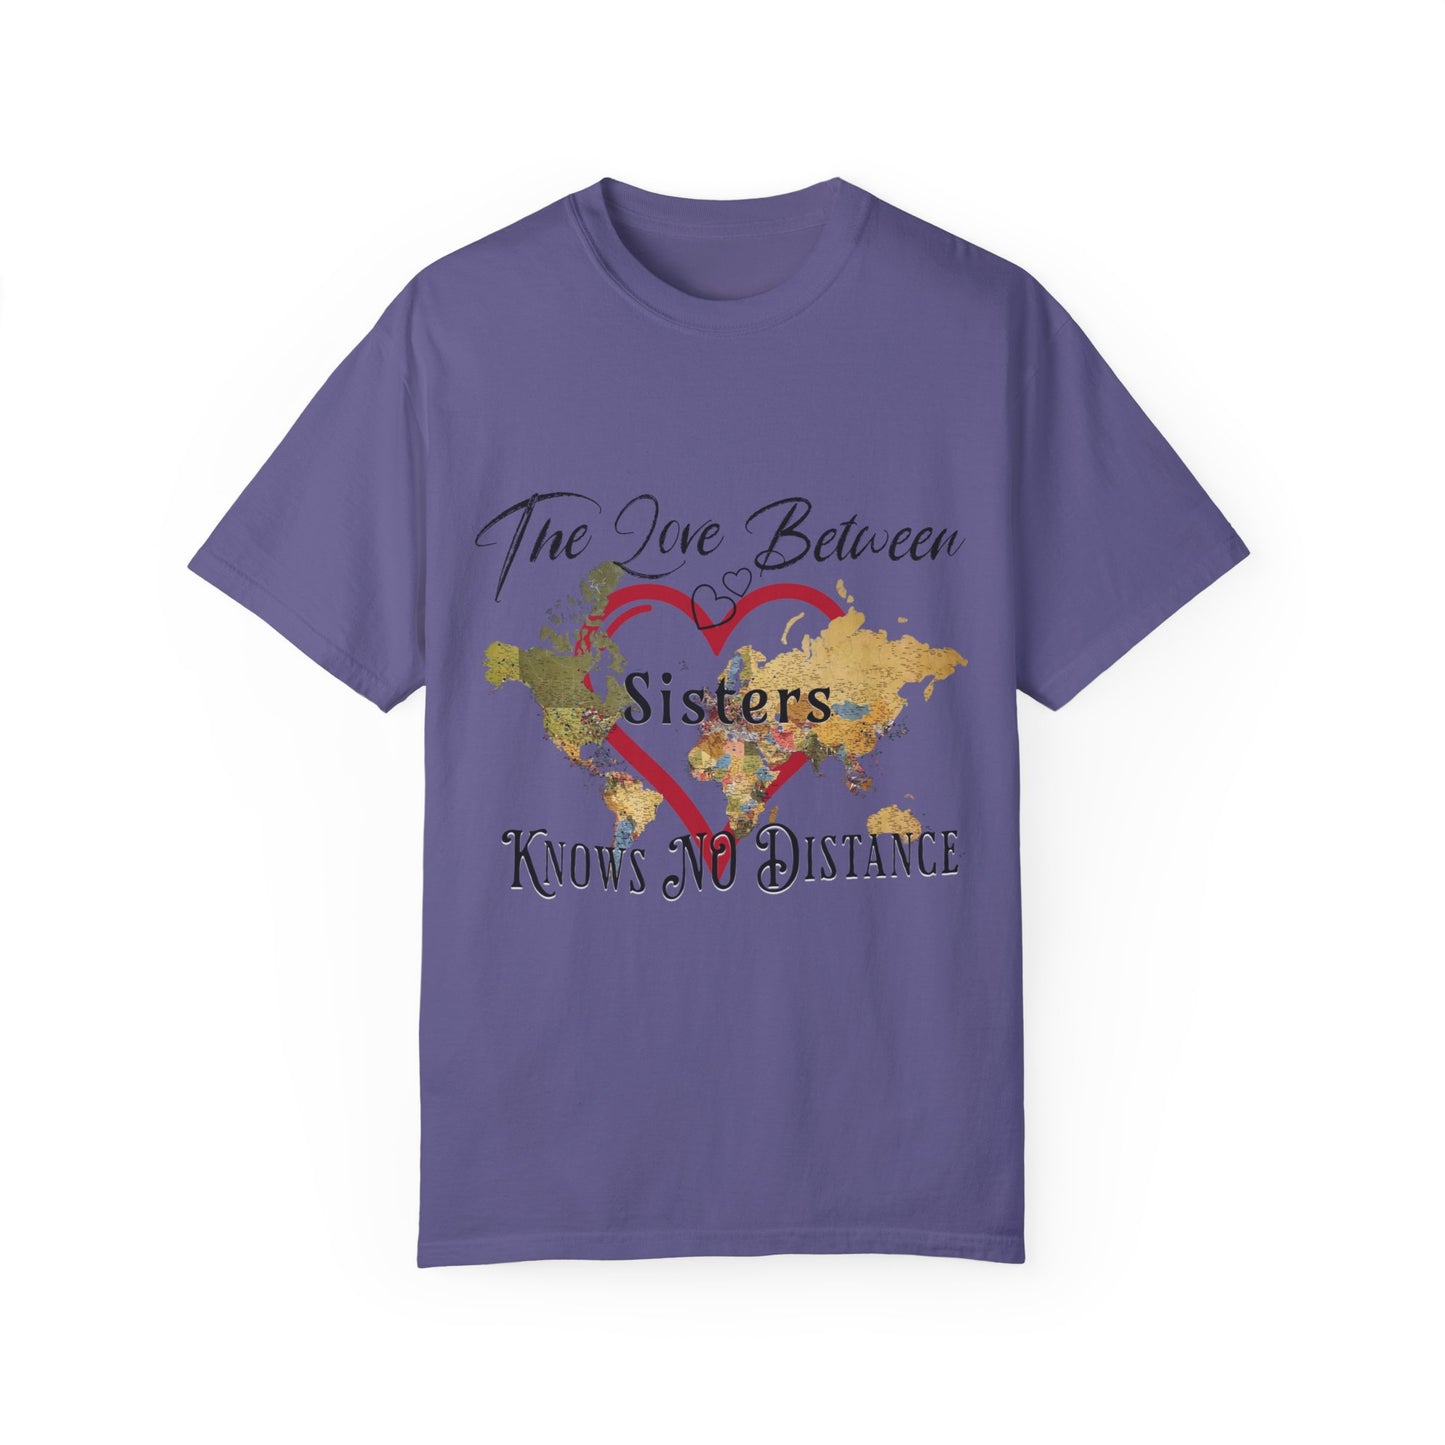 The love between sisters knows no distance - Unisex Garment-Dyed T-shirt